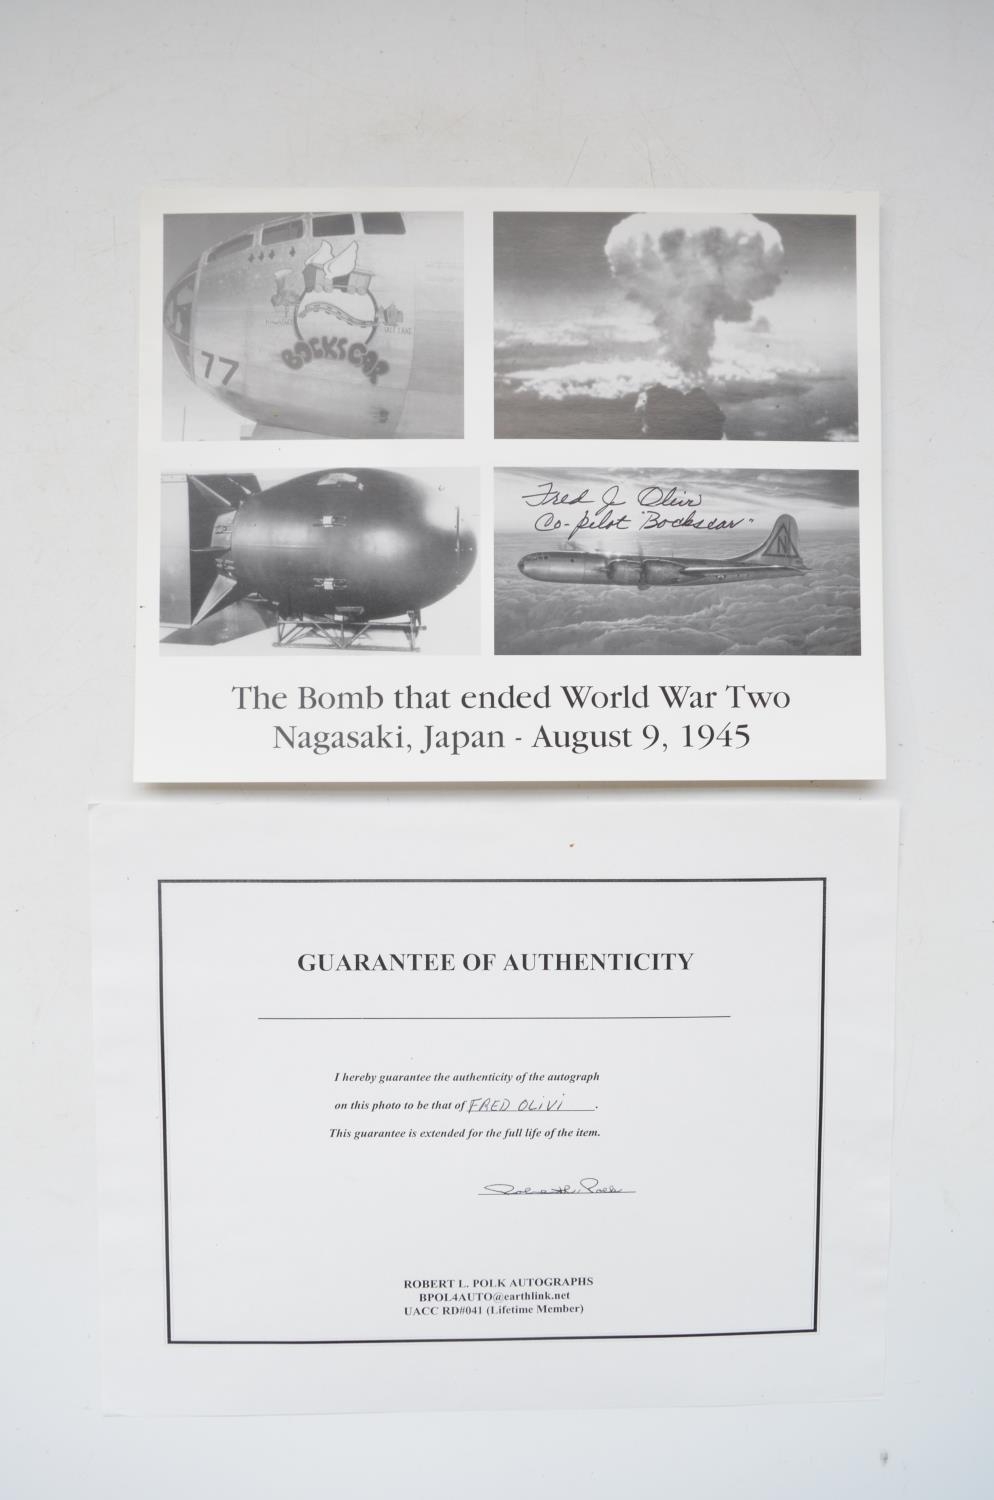 Photographic montage of 2nd atomic bomber Bockscar, signed by Co-pilot Fred Olivi with CoA